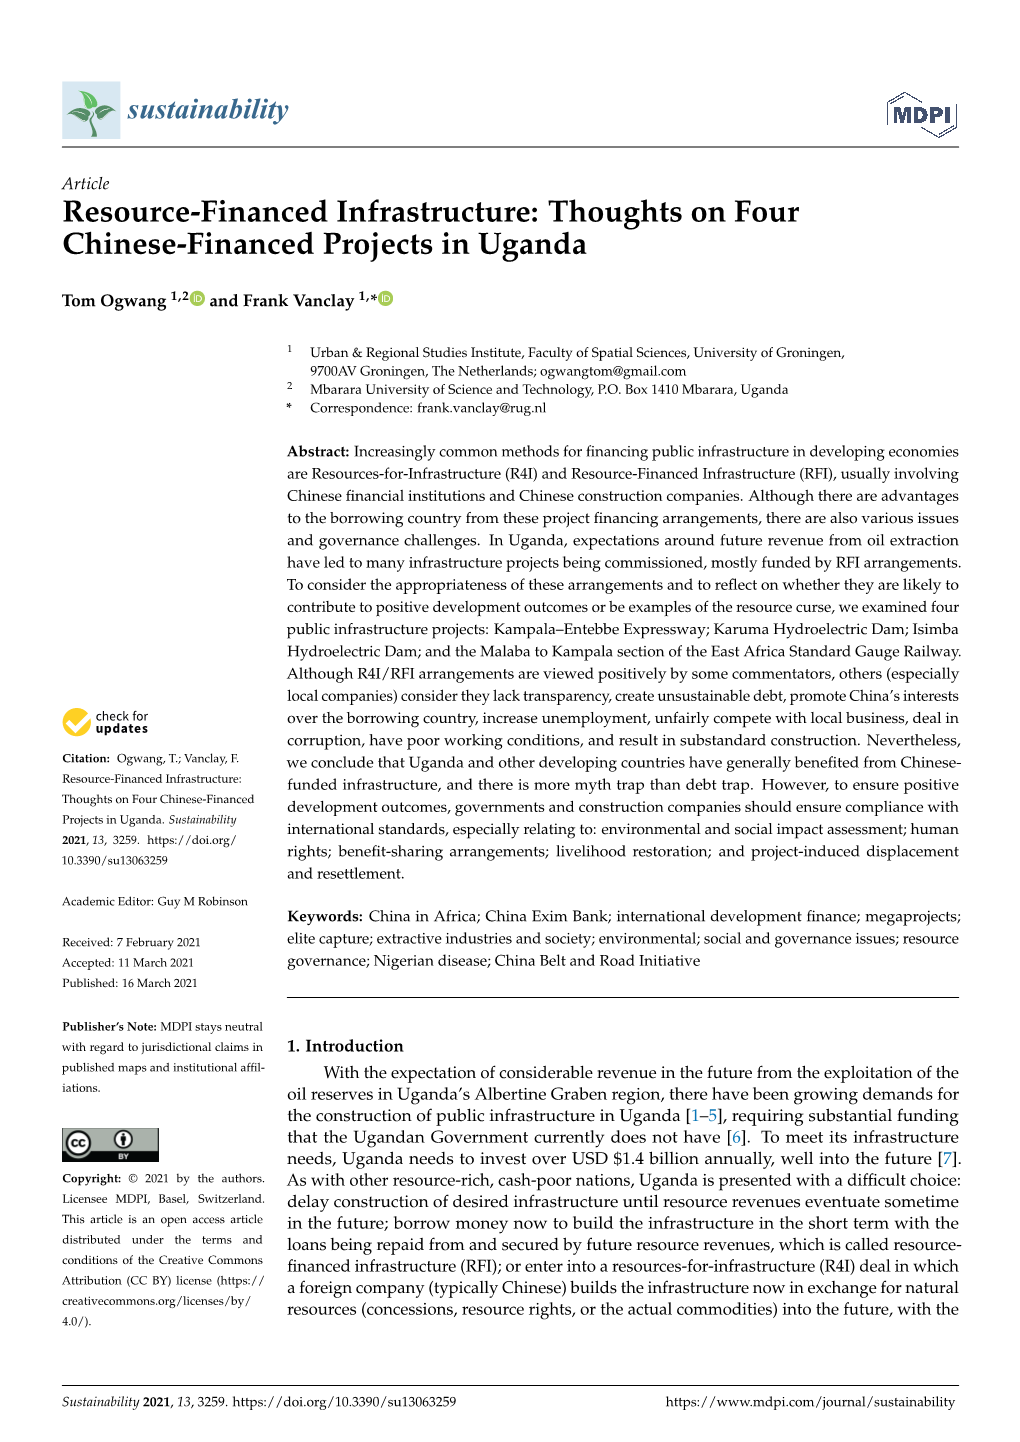 Thoughts on Four Chinese-Financed Projects in Uganda